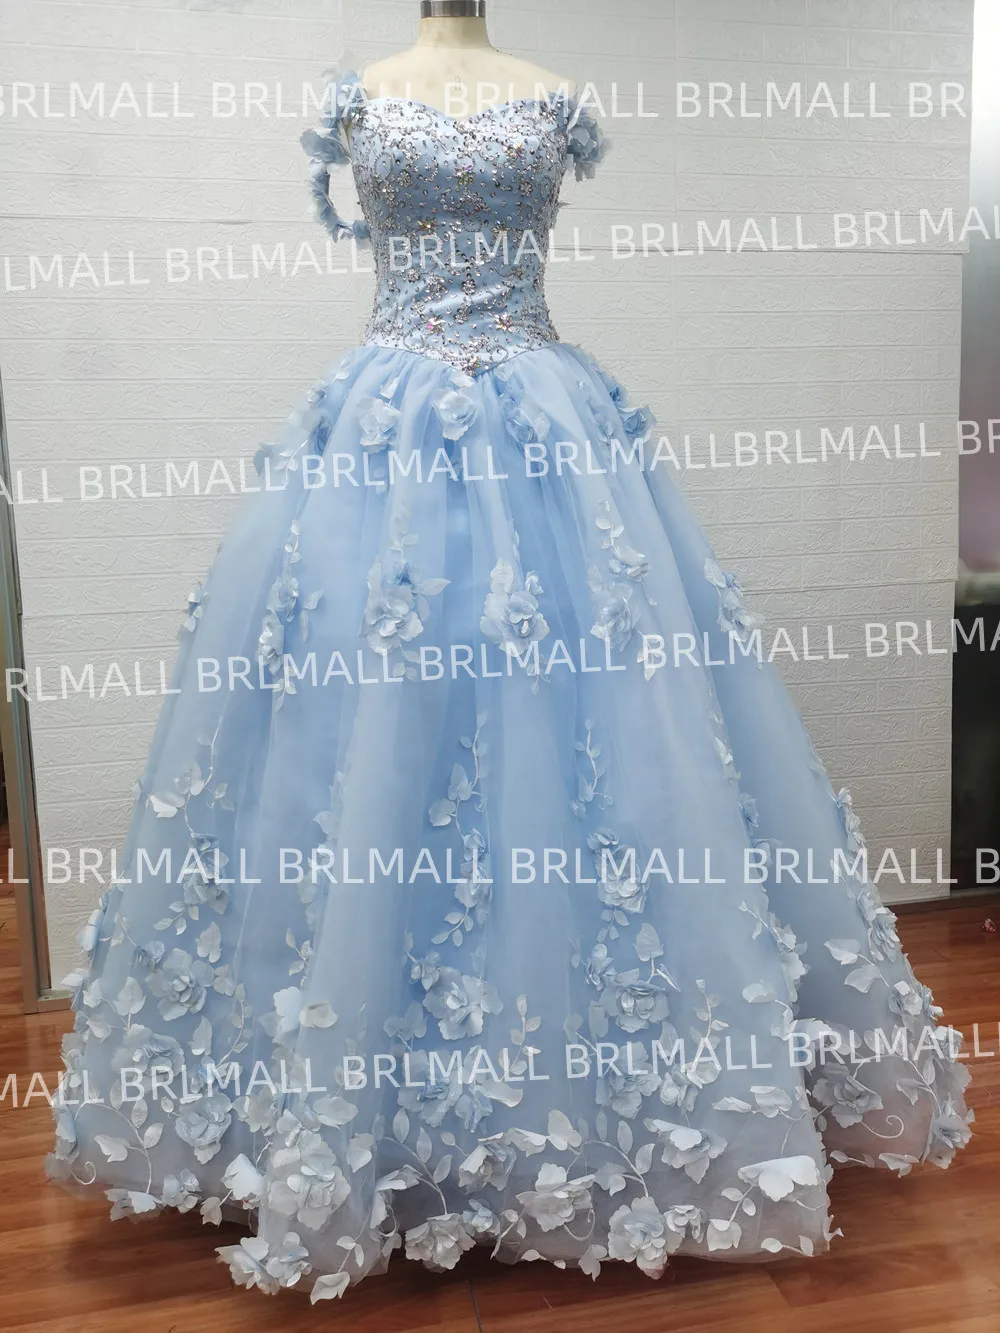 

Sky Blue 3D Flowers Quinceanera Dresses V Neck Prom Gowns Dreaming Floral Flower Straps Beaded Corset Back Sweet 15 16 Dress